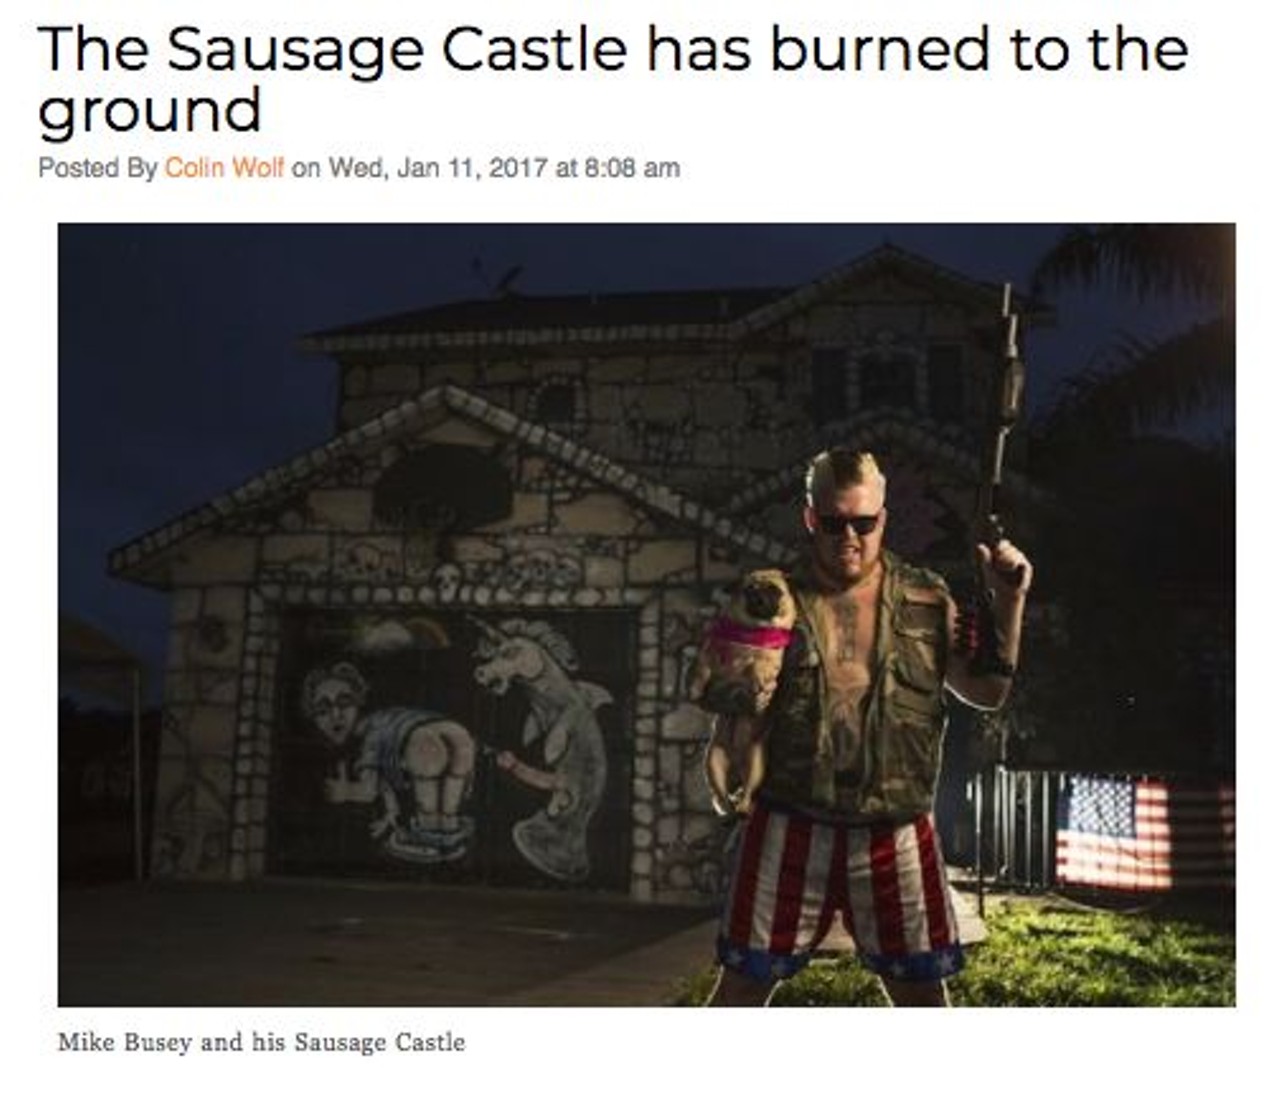 The Sausage Castle, once considered the "Wildest House in America," has burned to the ground. Read more